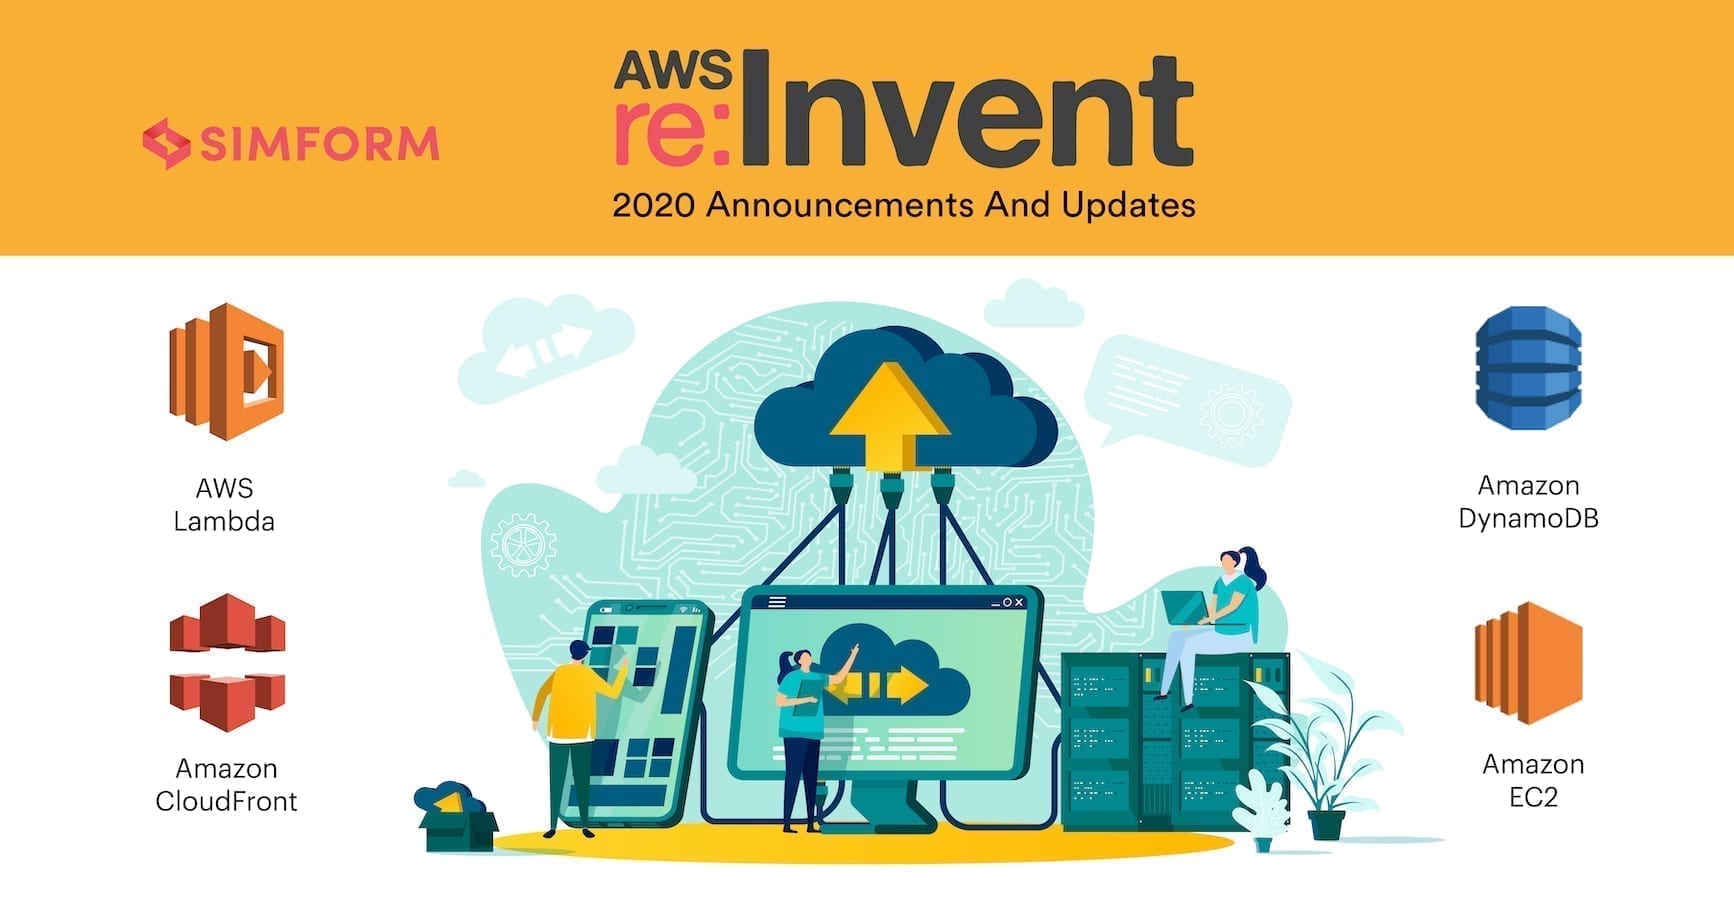 AWS reInvent 2020 Announcements And Updates | Simform